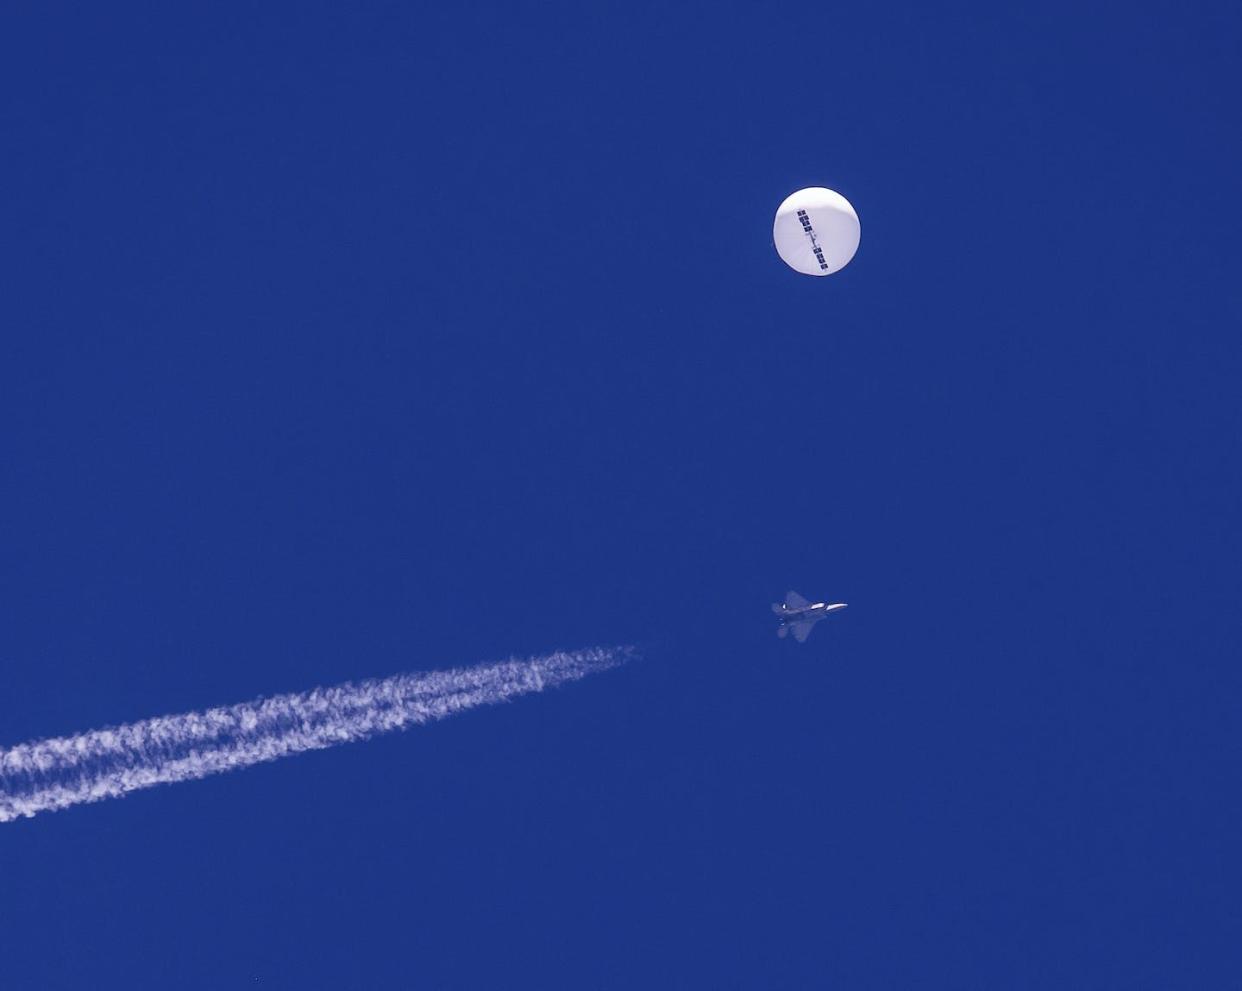 In this photo provided by Chad Fish, a large balloon drifts above the Atlantic Ocean off the coast of South Carolina, with a fighter jet and its contrail seen below it, on Feb. 4, 2023. (Chad Fish via AP)